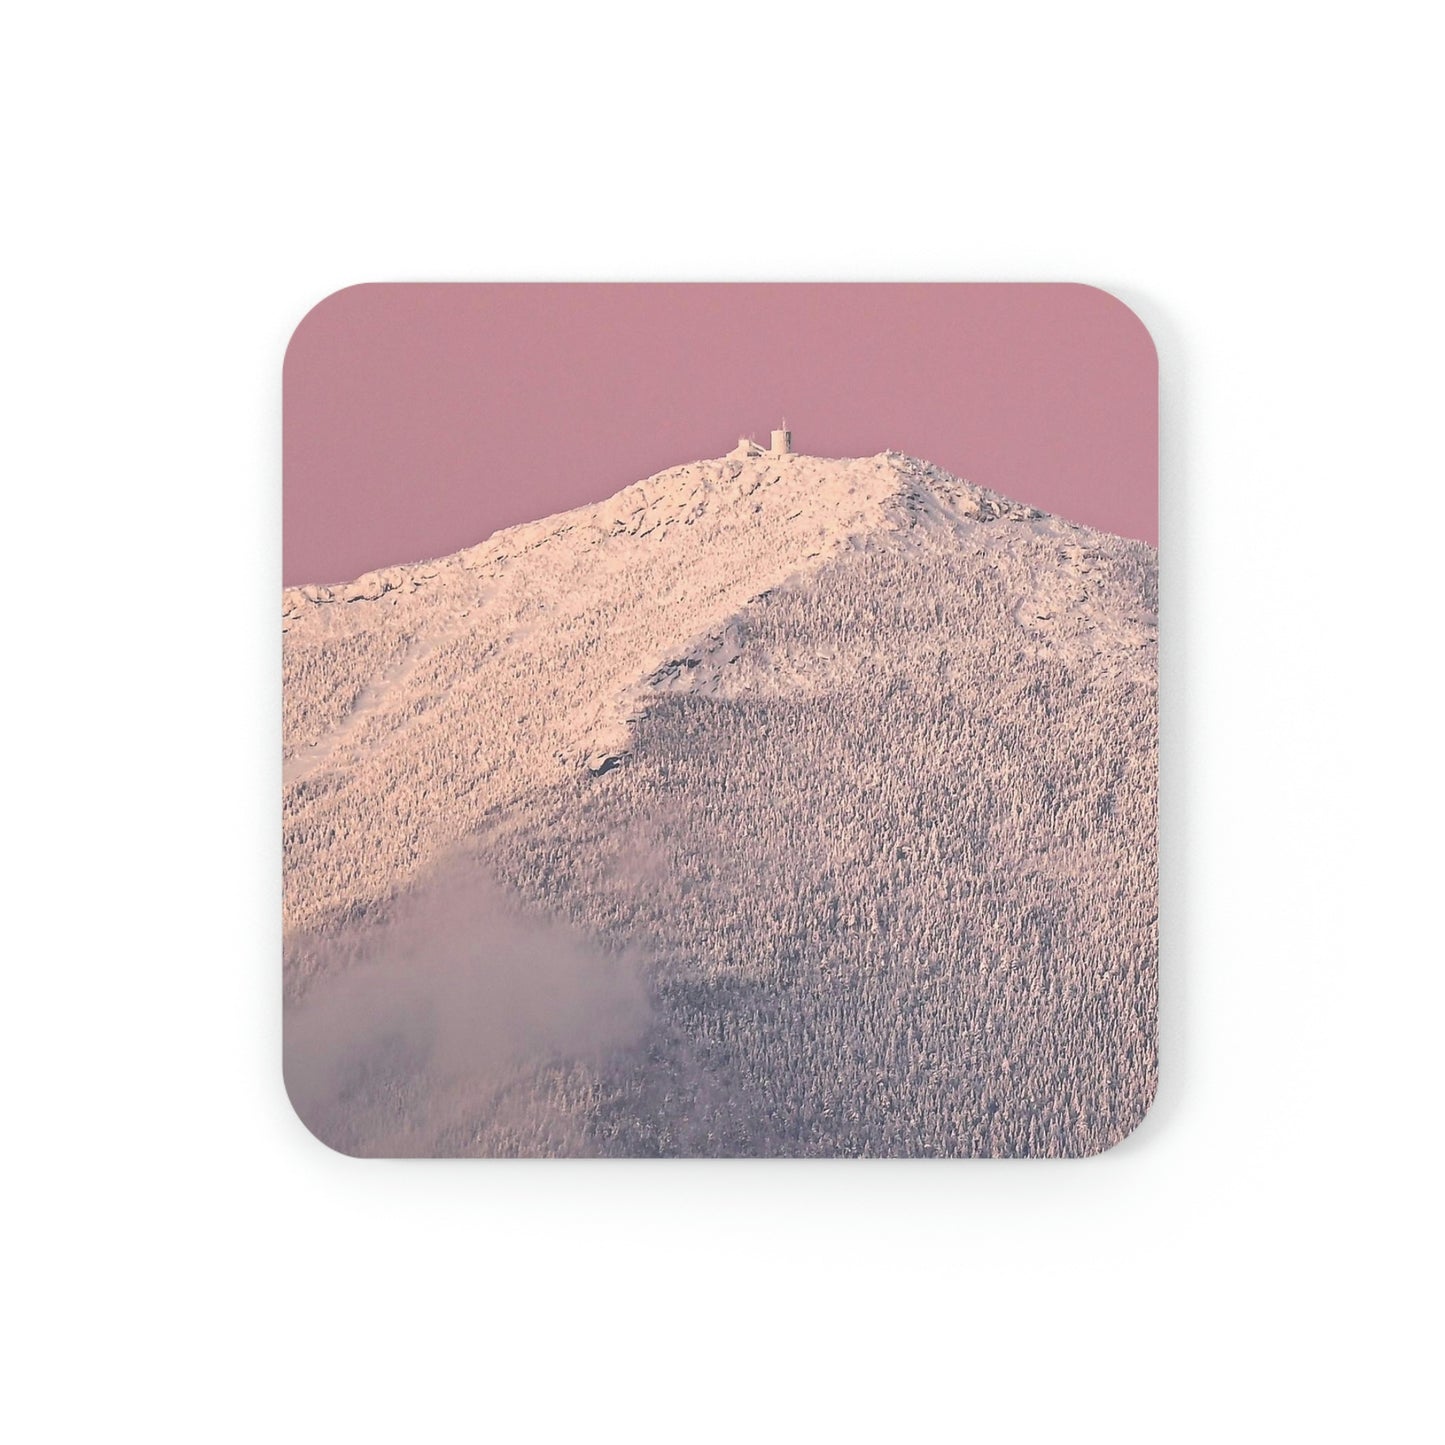 Cork Back Coaster - Pretty in Pink, Whiteface